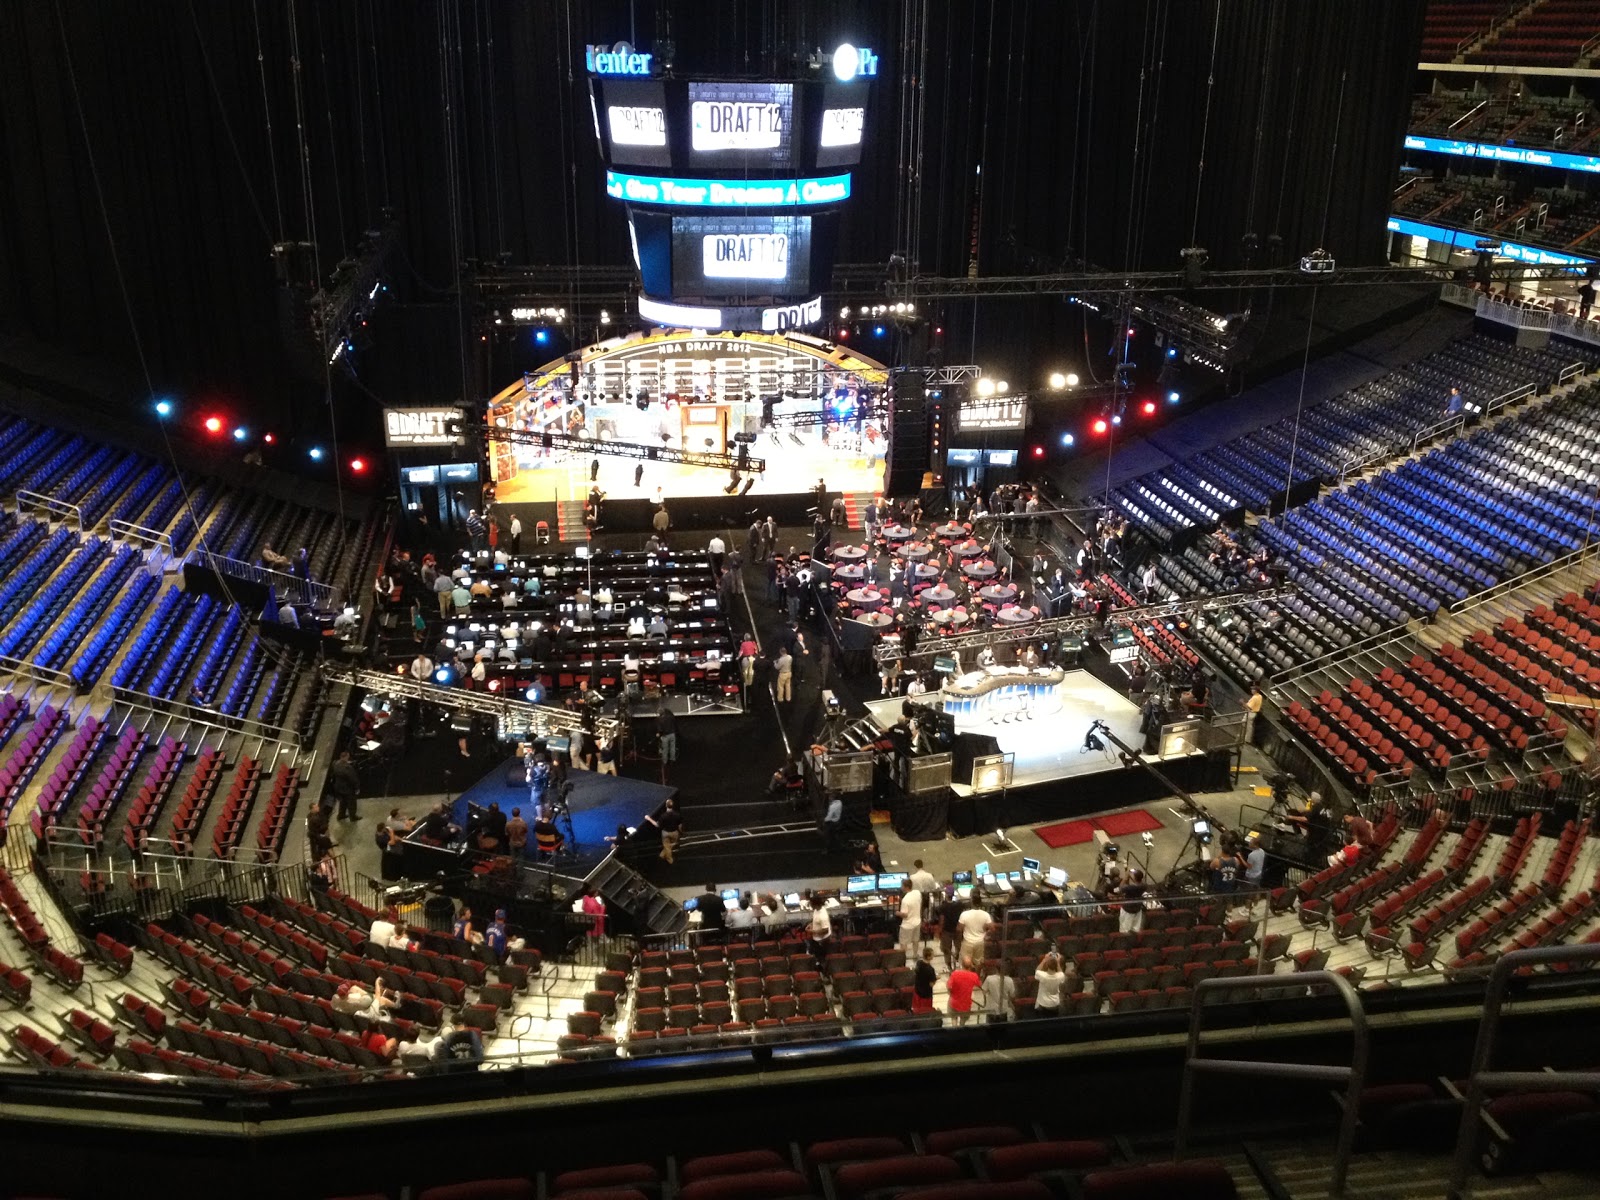 The Sports Complex: The 2012 NBA Draft: A Fan’s Journey